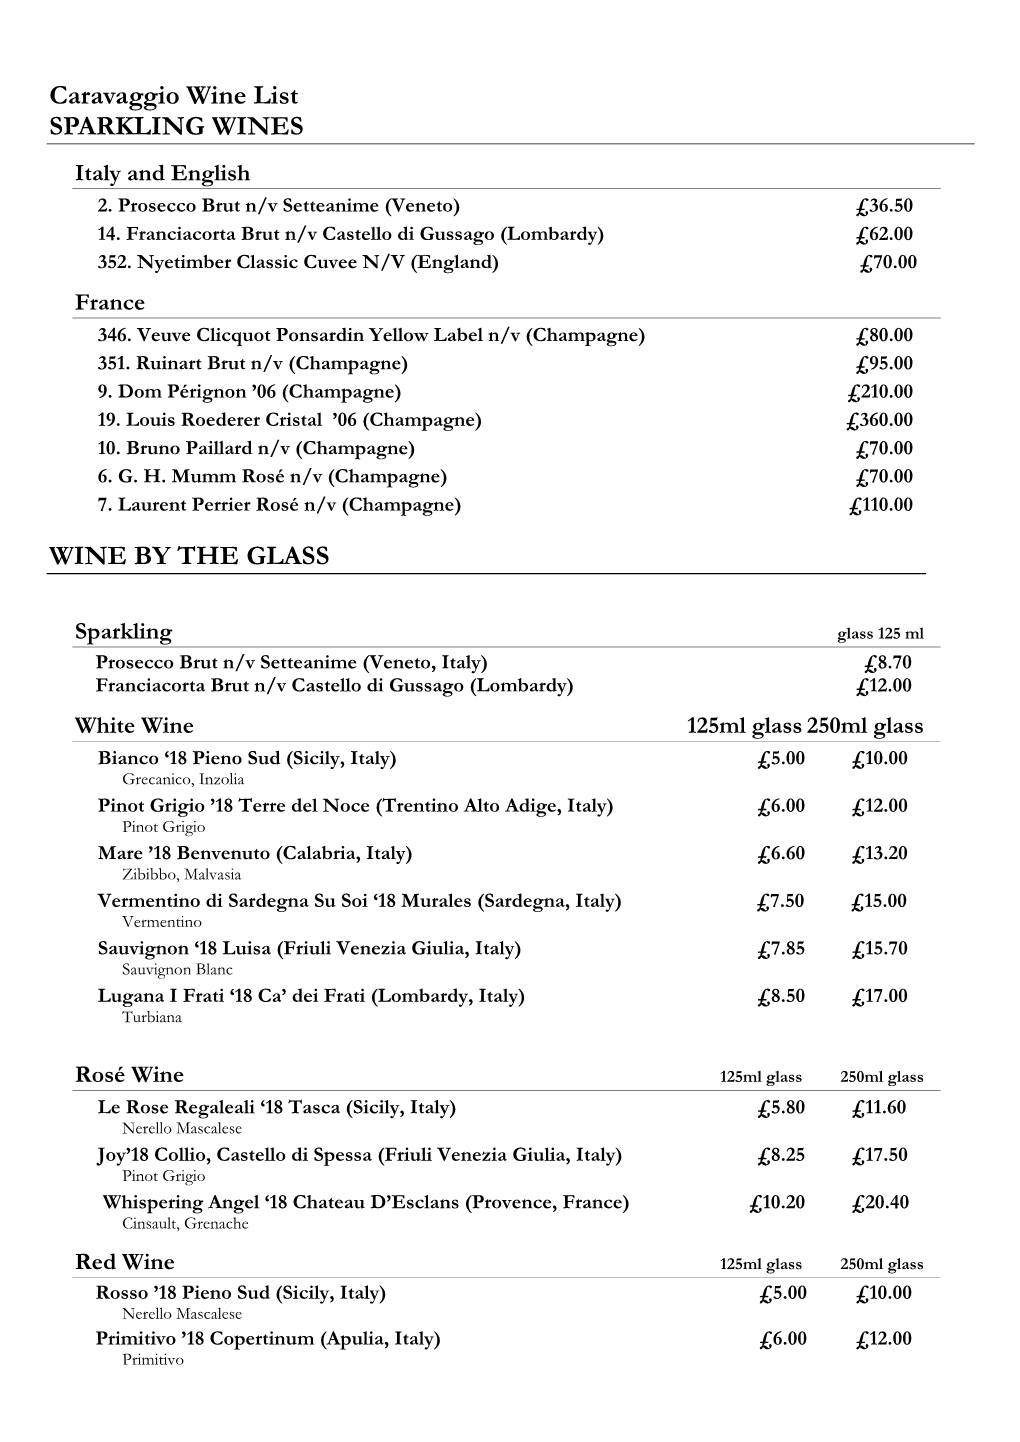 Caravaggio Wine List SPARKLING WINES WINE by the GLASS